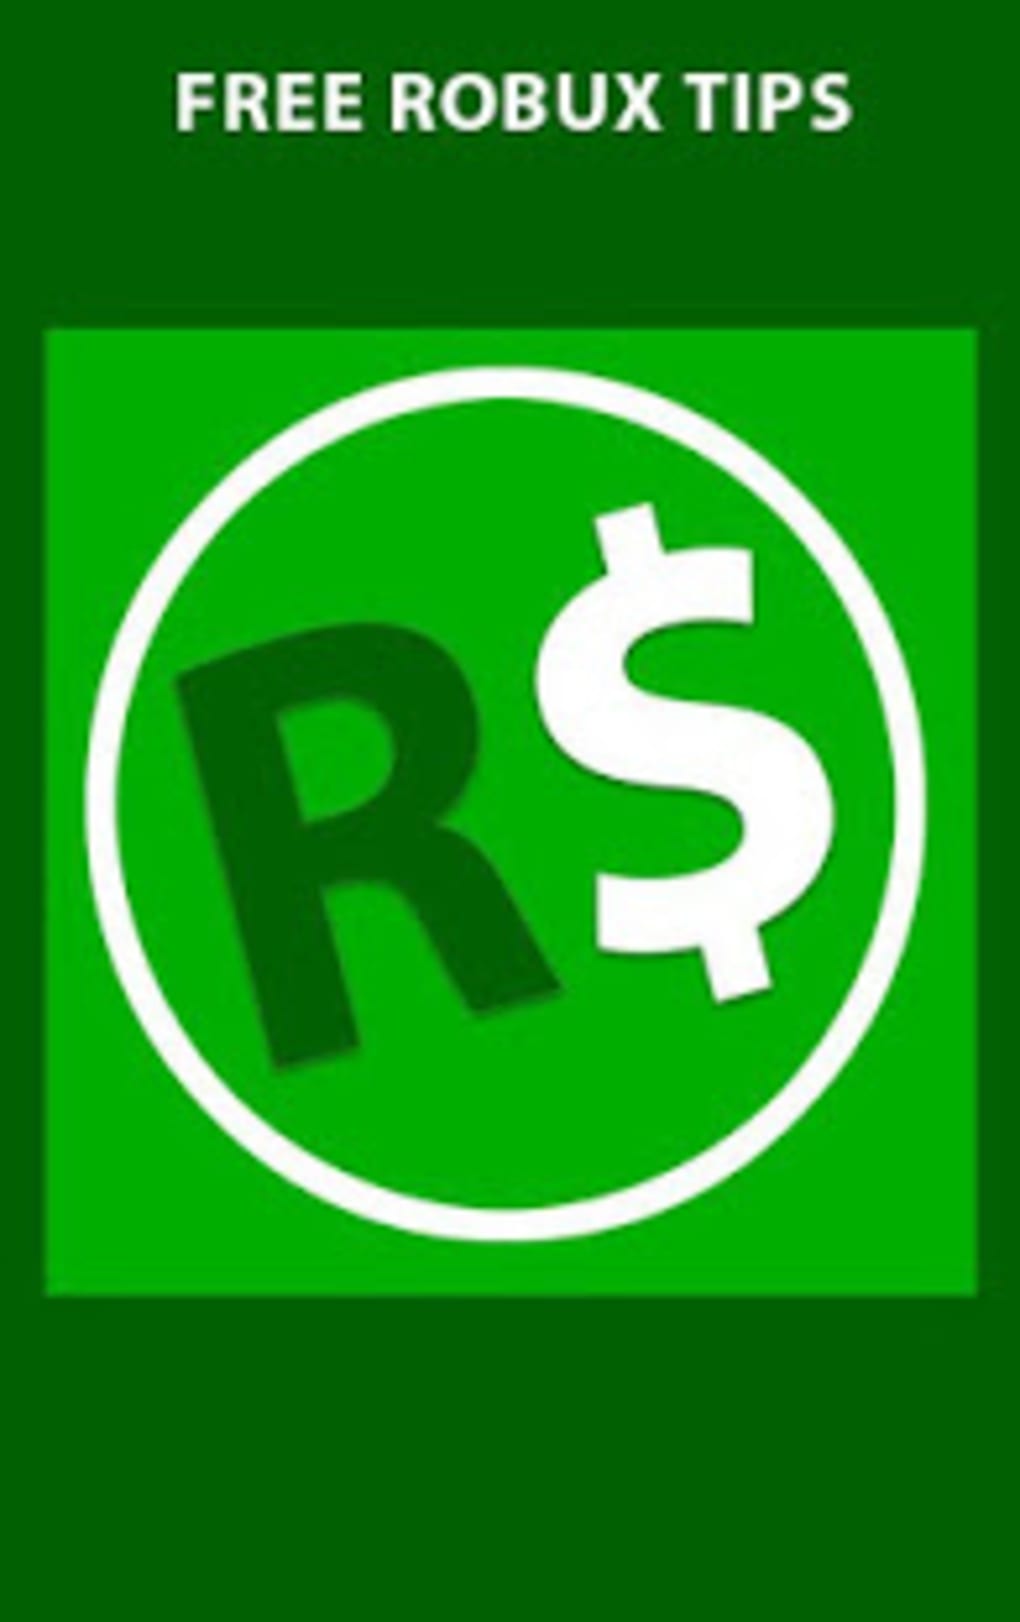 Free Robux Lucky Patcher - free robux 2019 l new tips to get robux free l for android